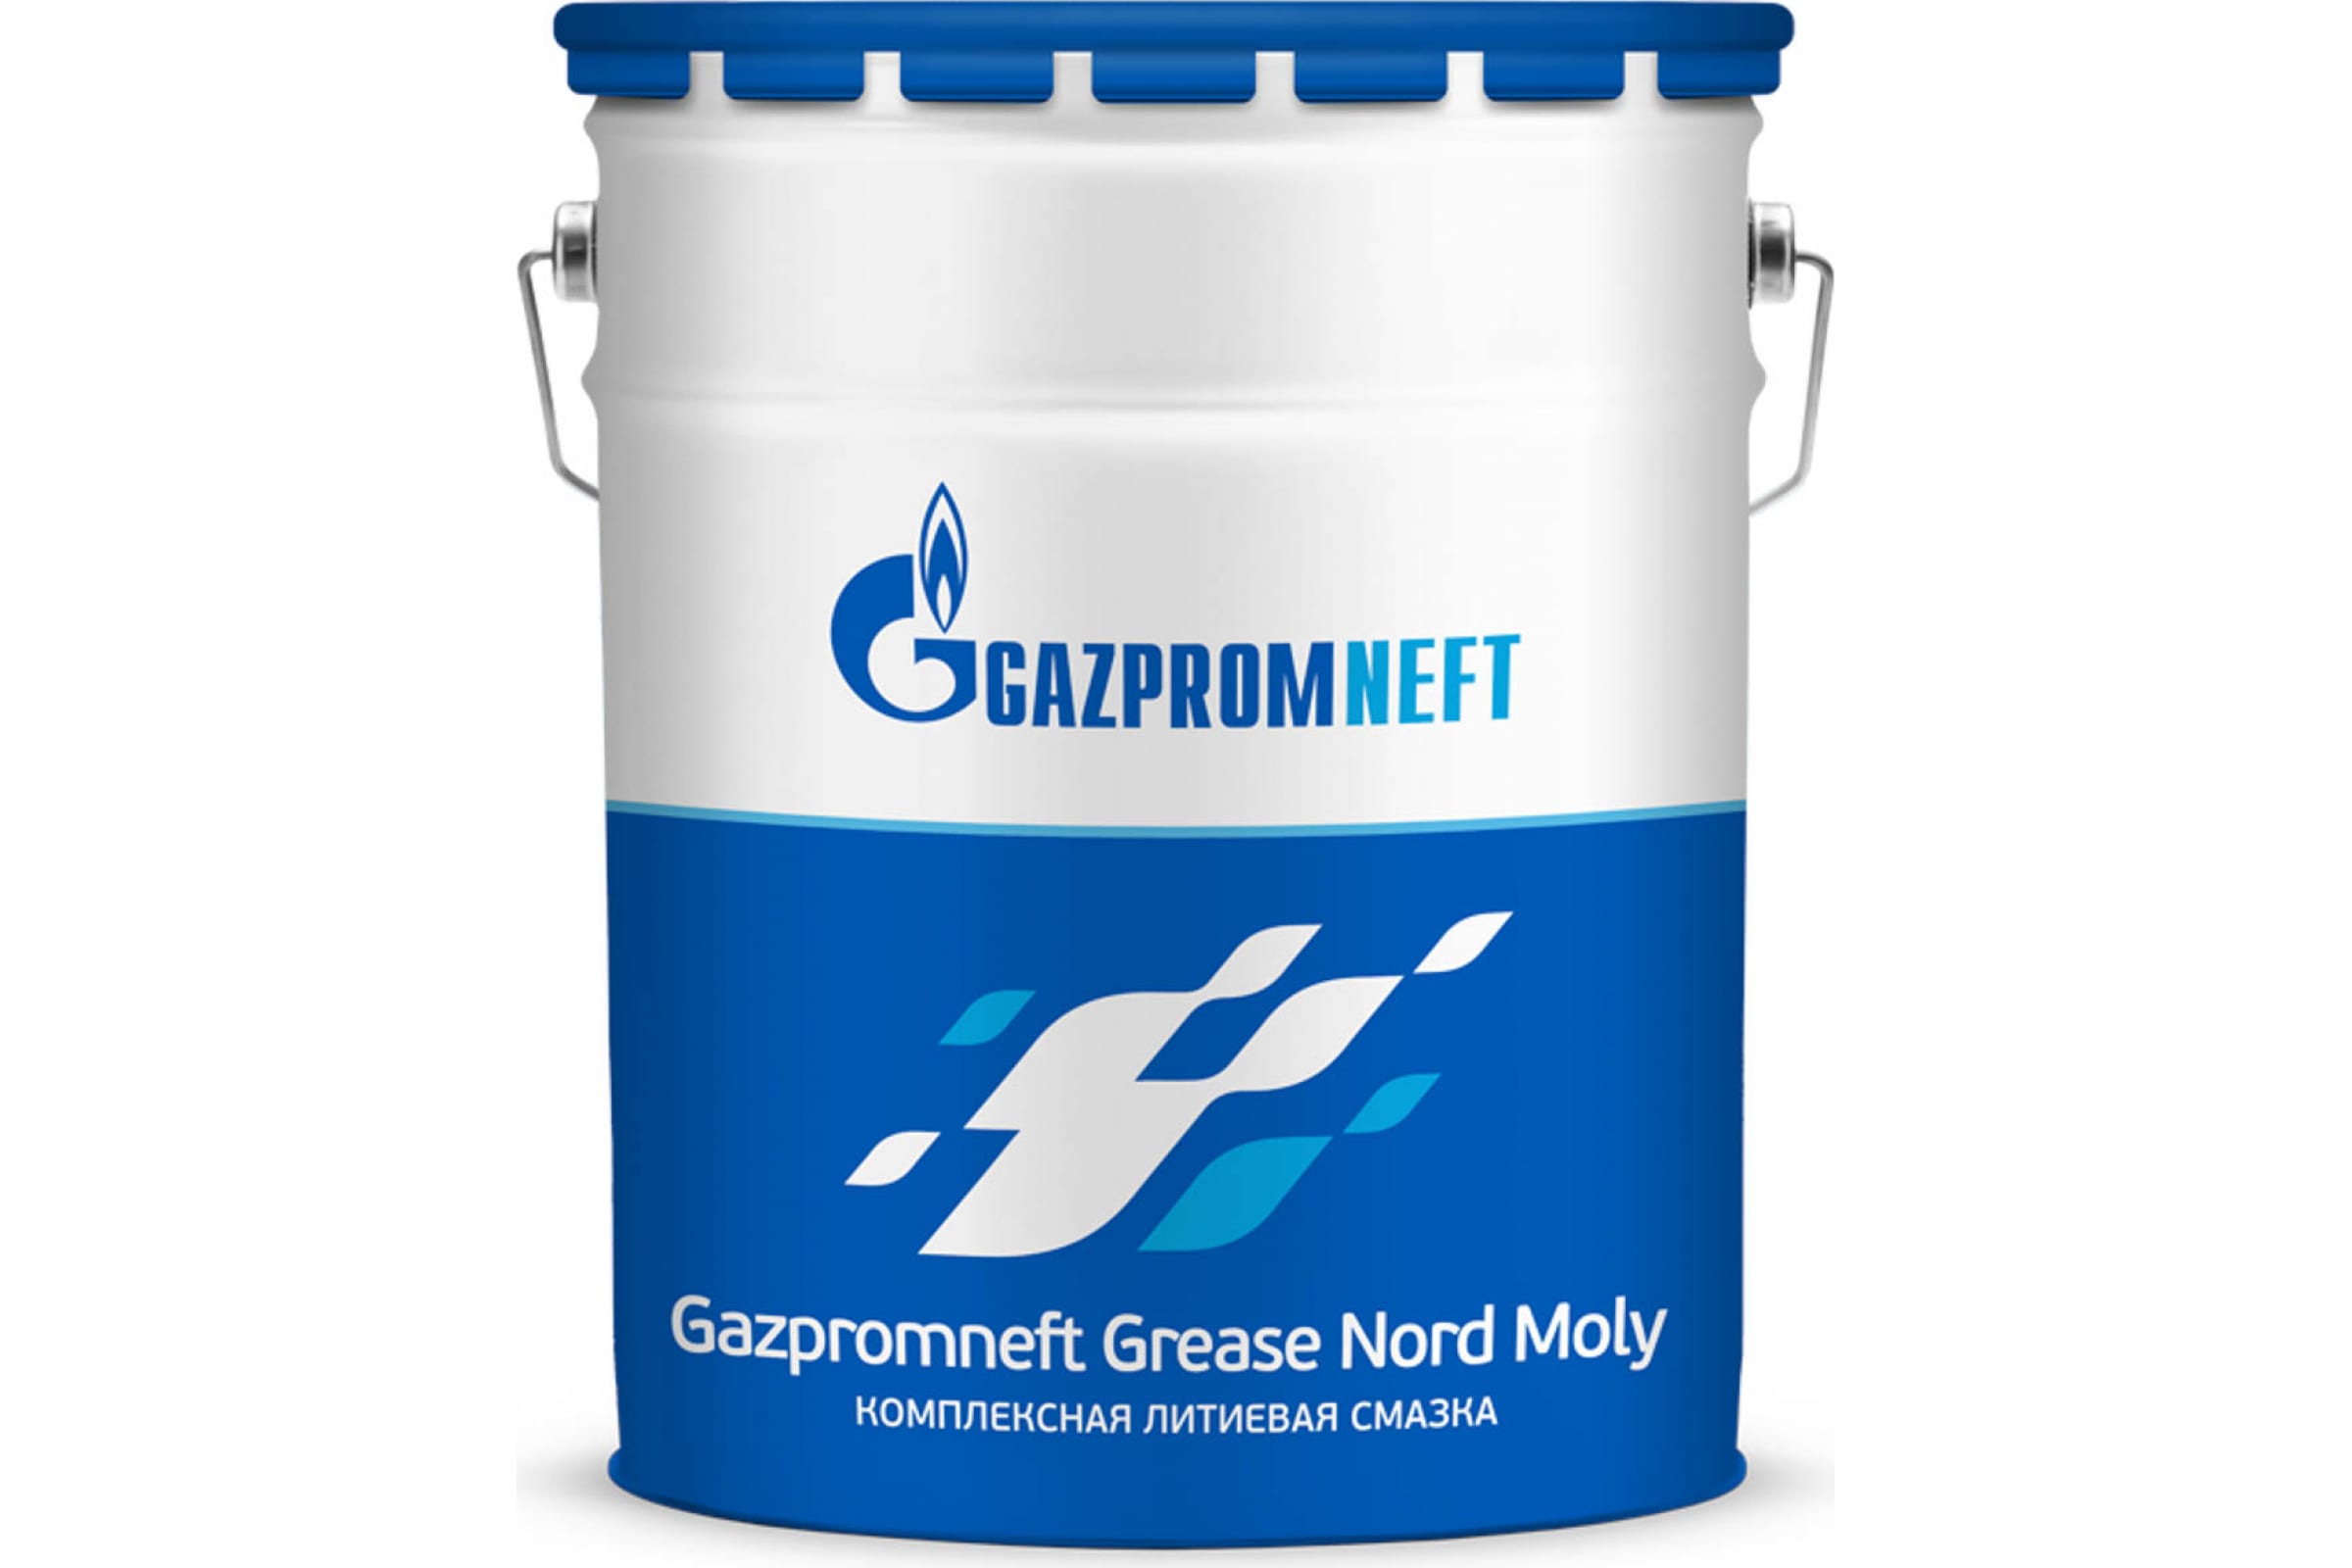 фото Смазка gazpromneft grease nord moly лит, 18кг, 2389906950